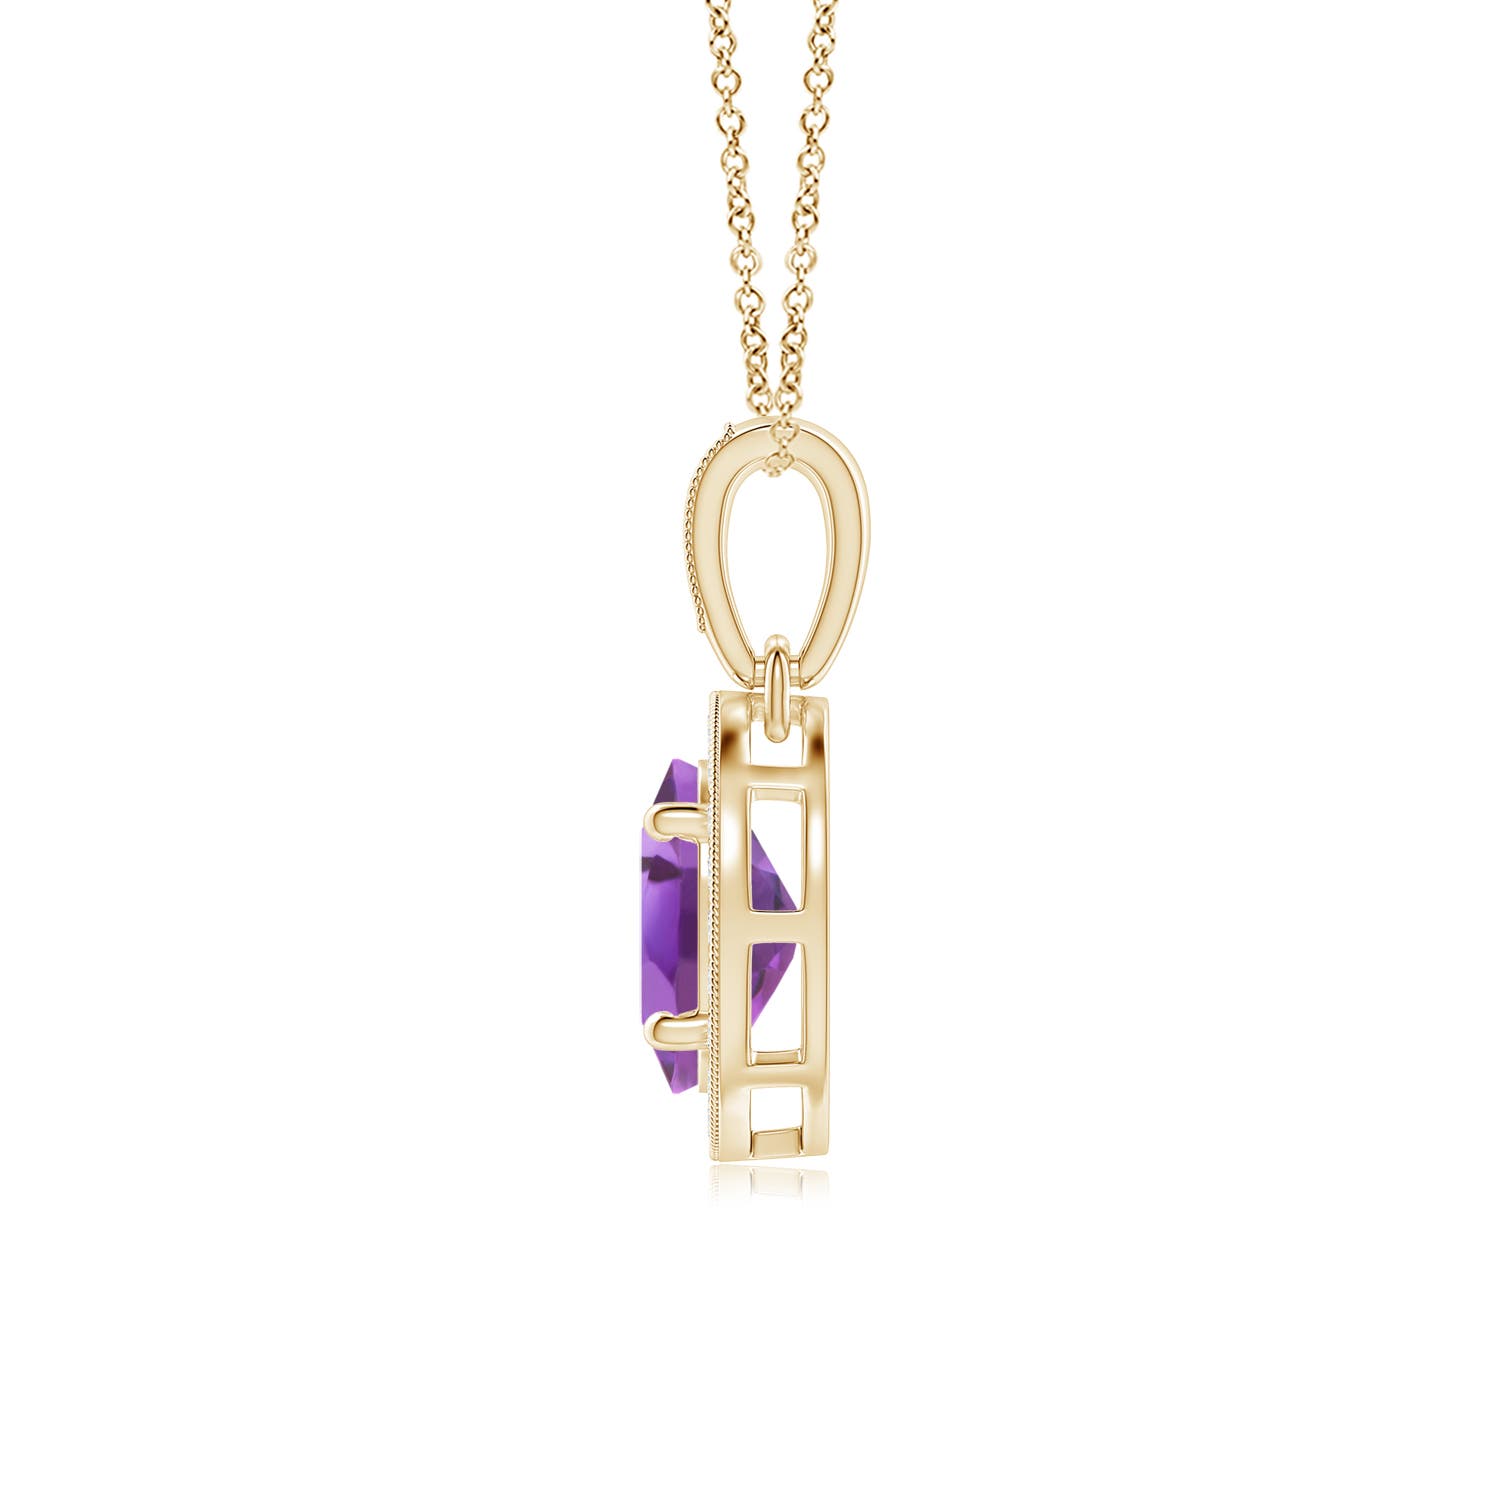 A - Amethyst / 0.82 CT / 14 KT Yellow Gold